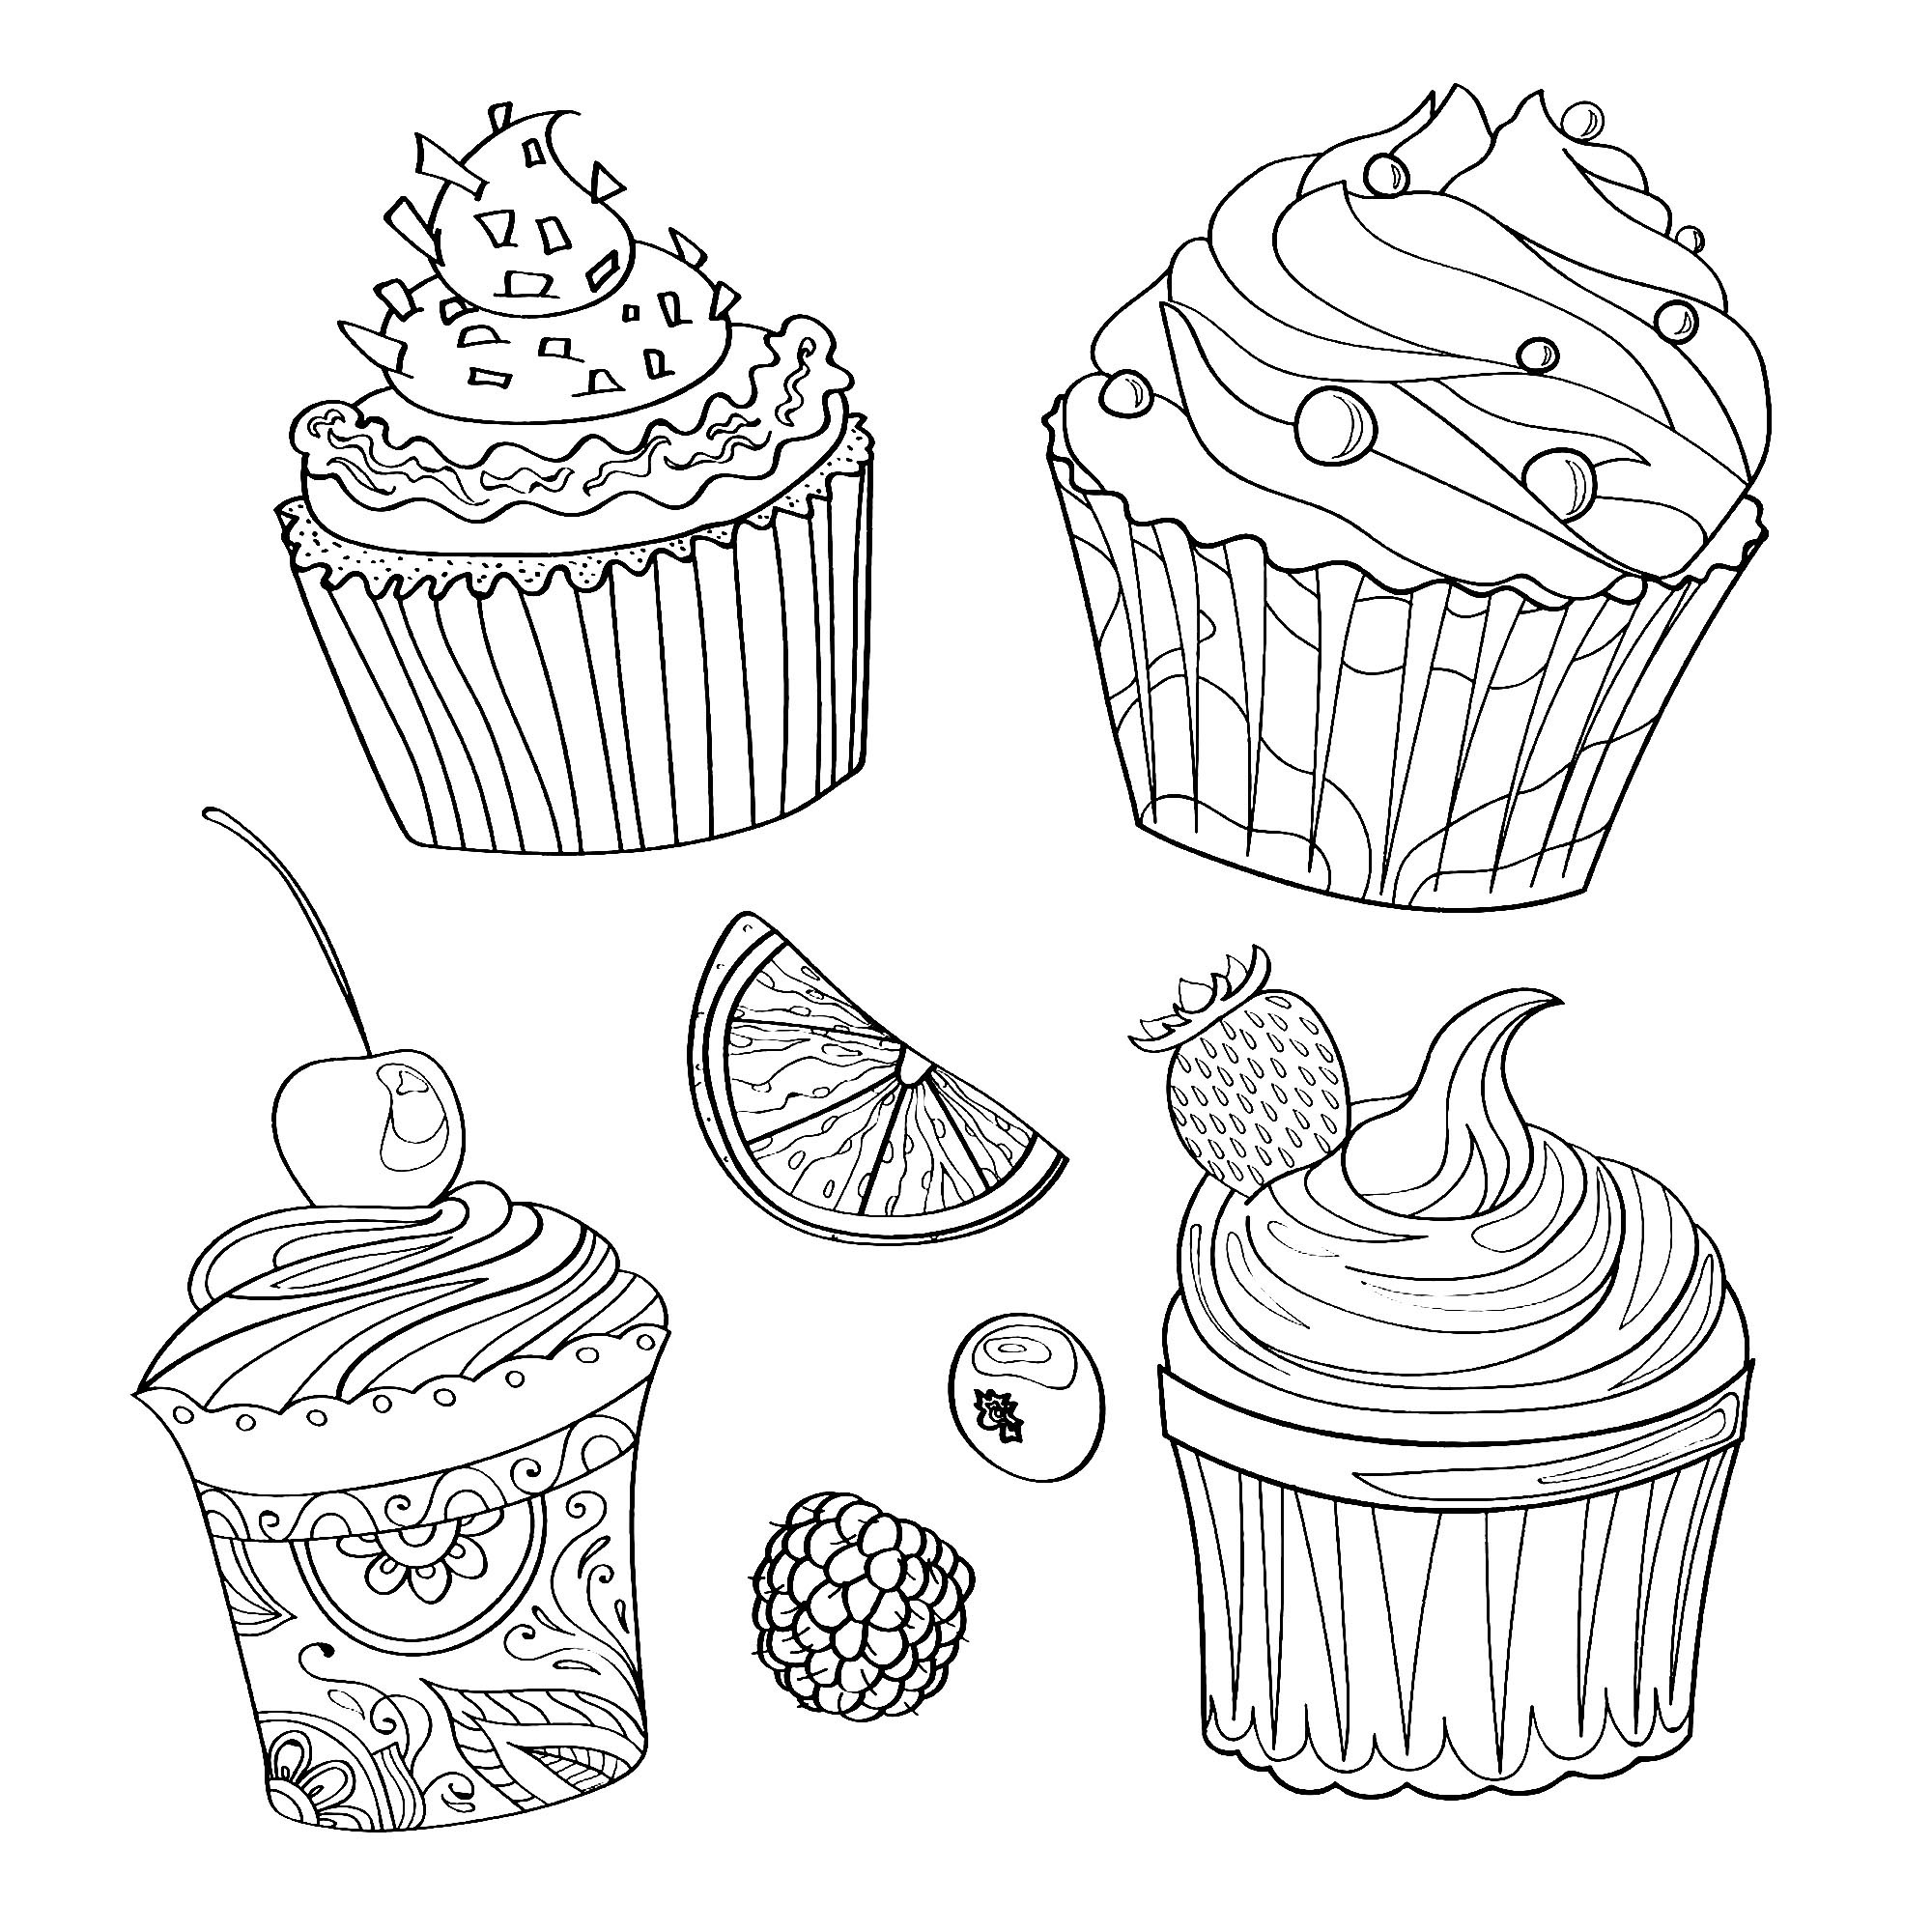 Delicious cupcakes and fruit pieces - Cupcakes And Cakes Kids Coloring Pages